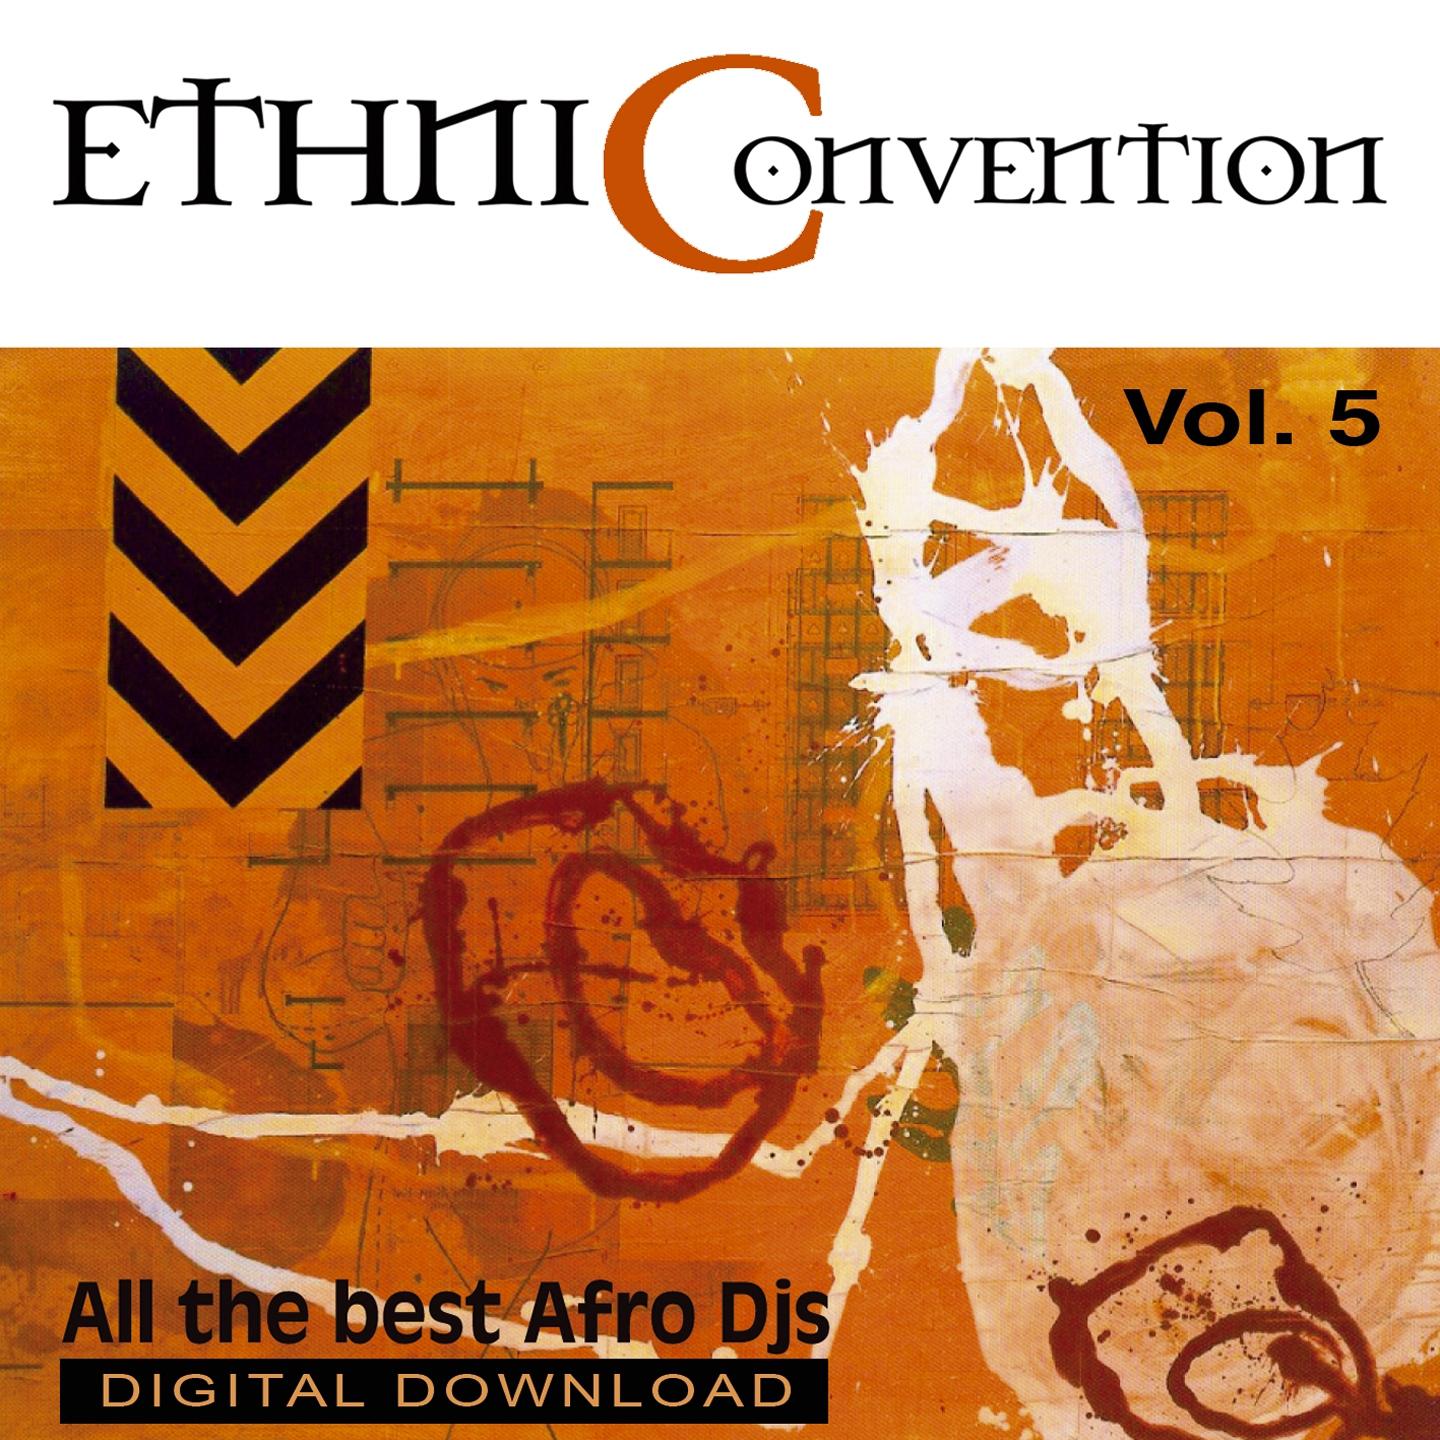 Ethniconvention, Vol. 5 (All the Best Afro DJs)